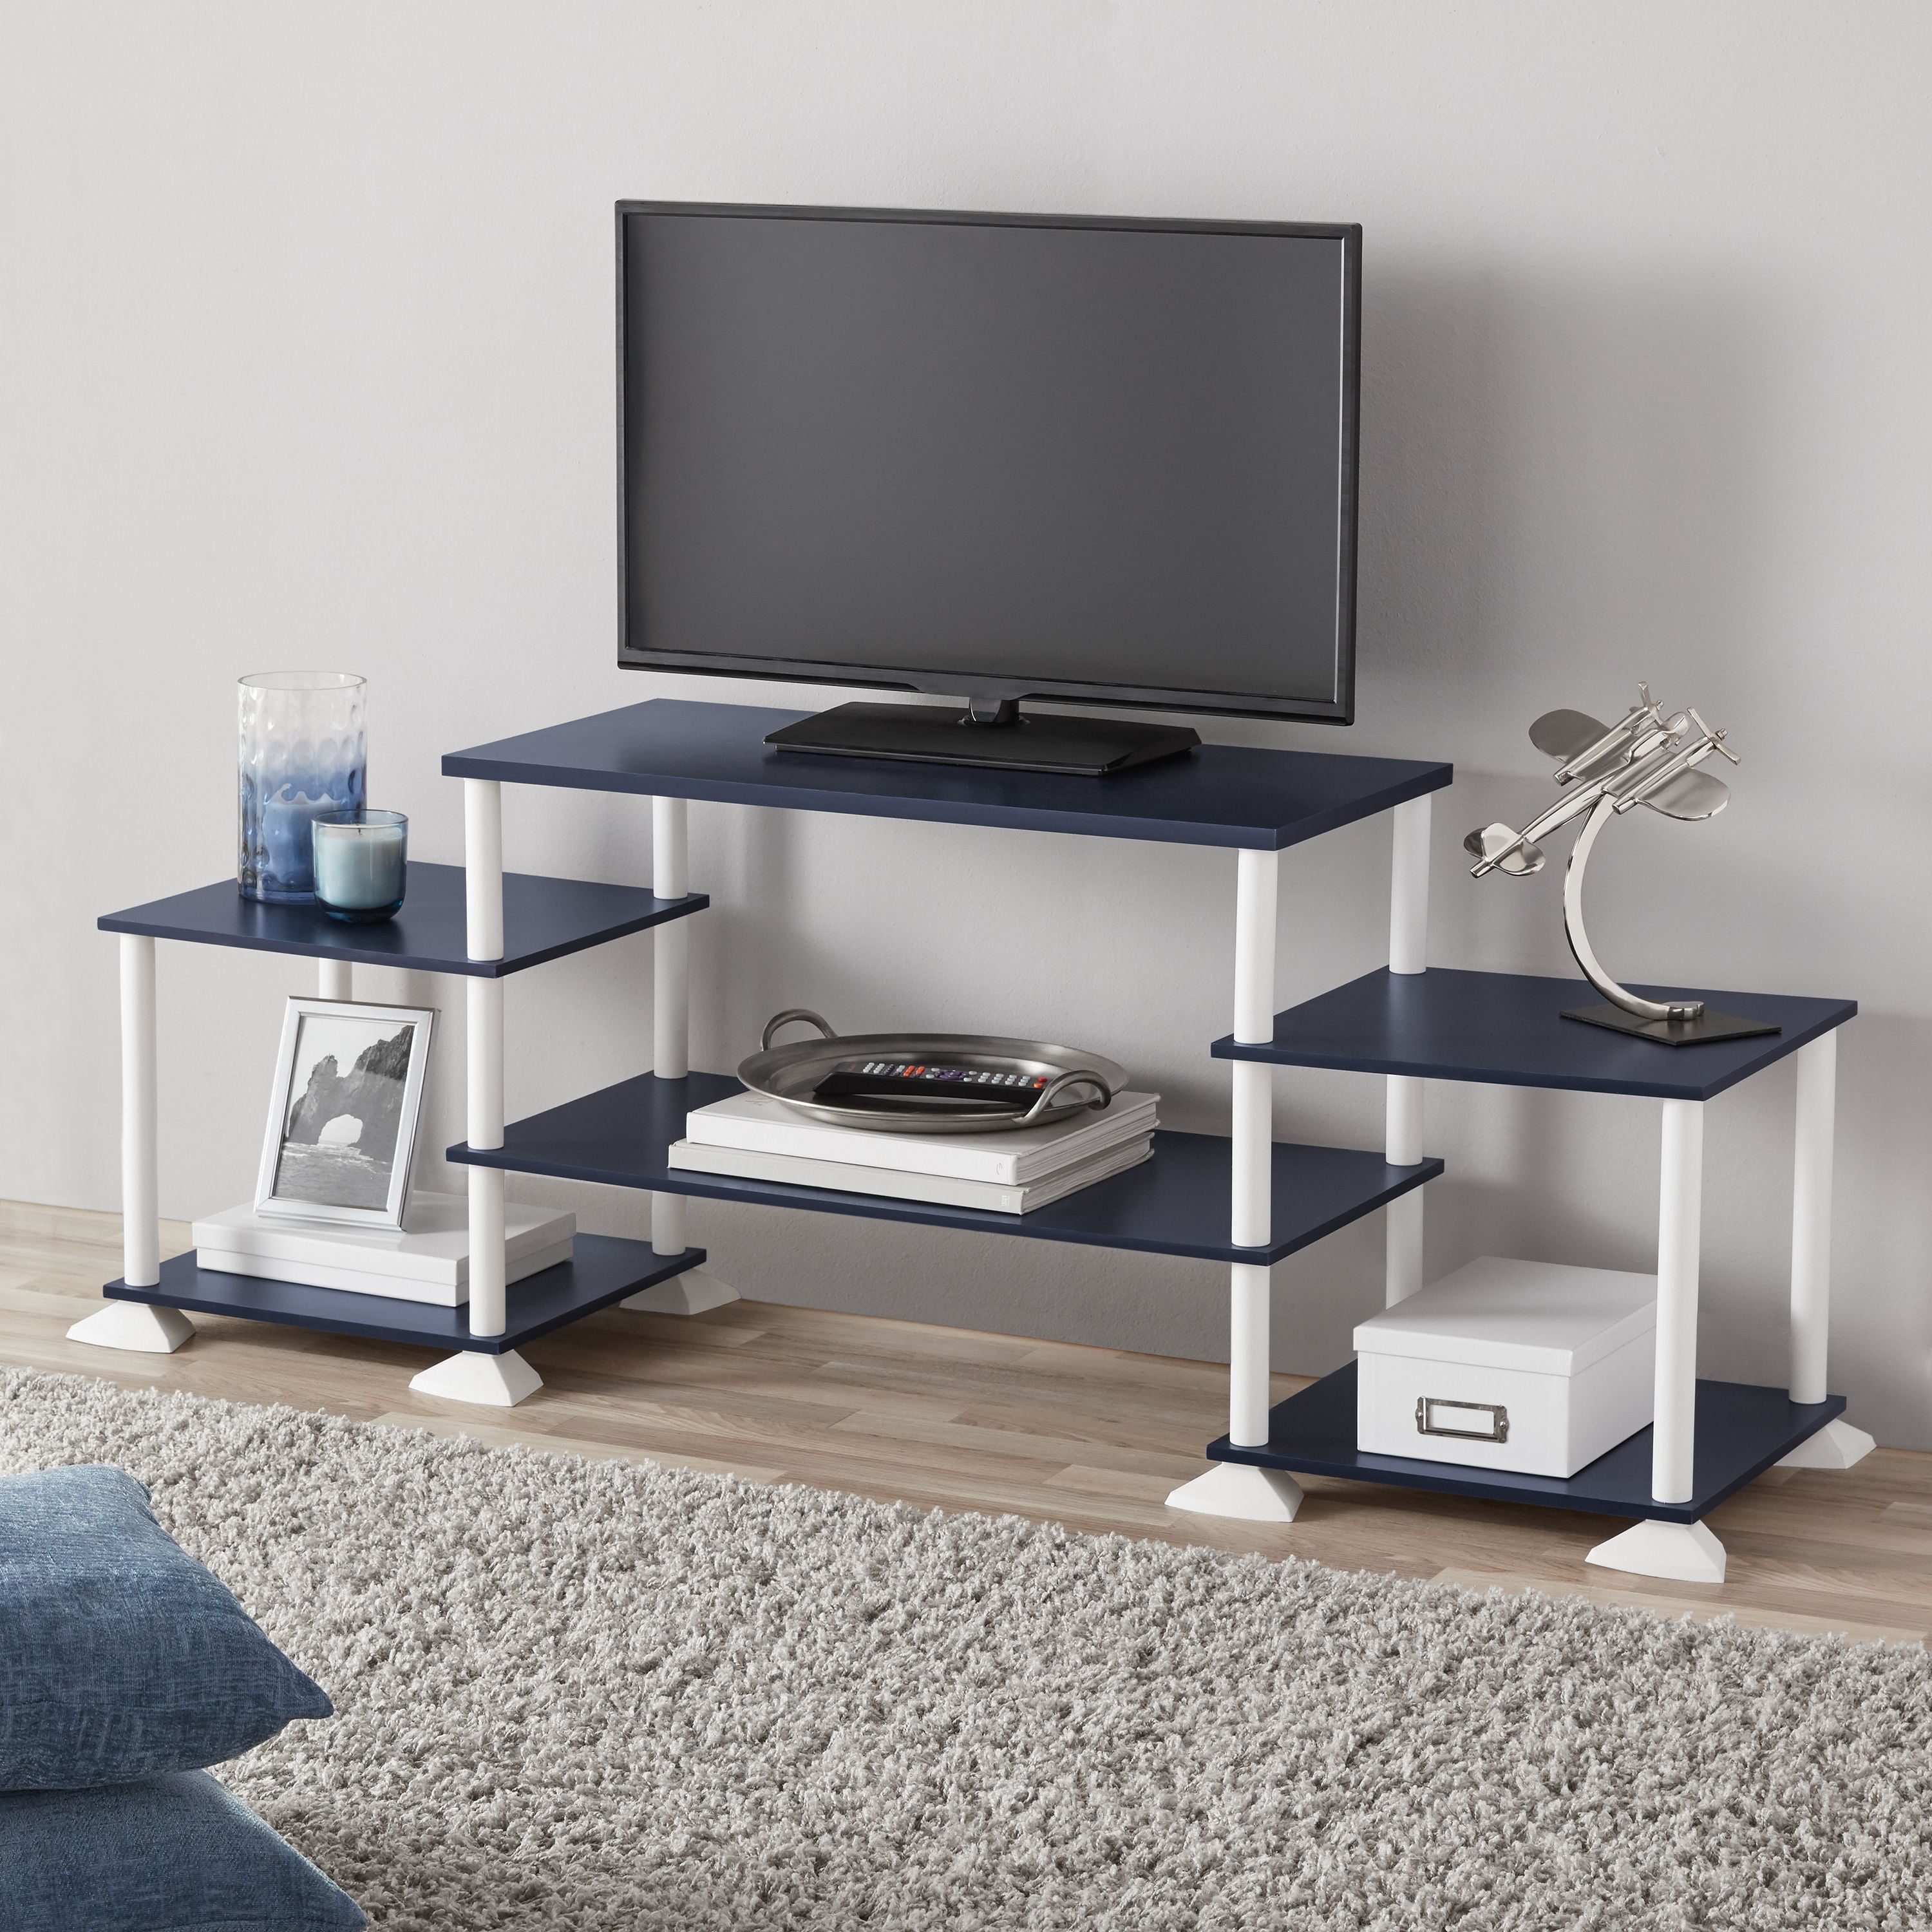 3-Cube Entertainment Center Sleek Modern TV Stand for TVs up to 40" Gray NEW 